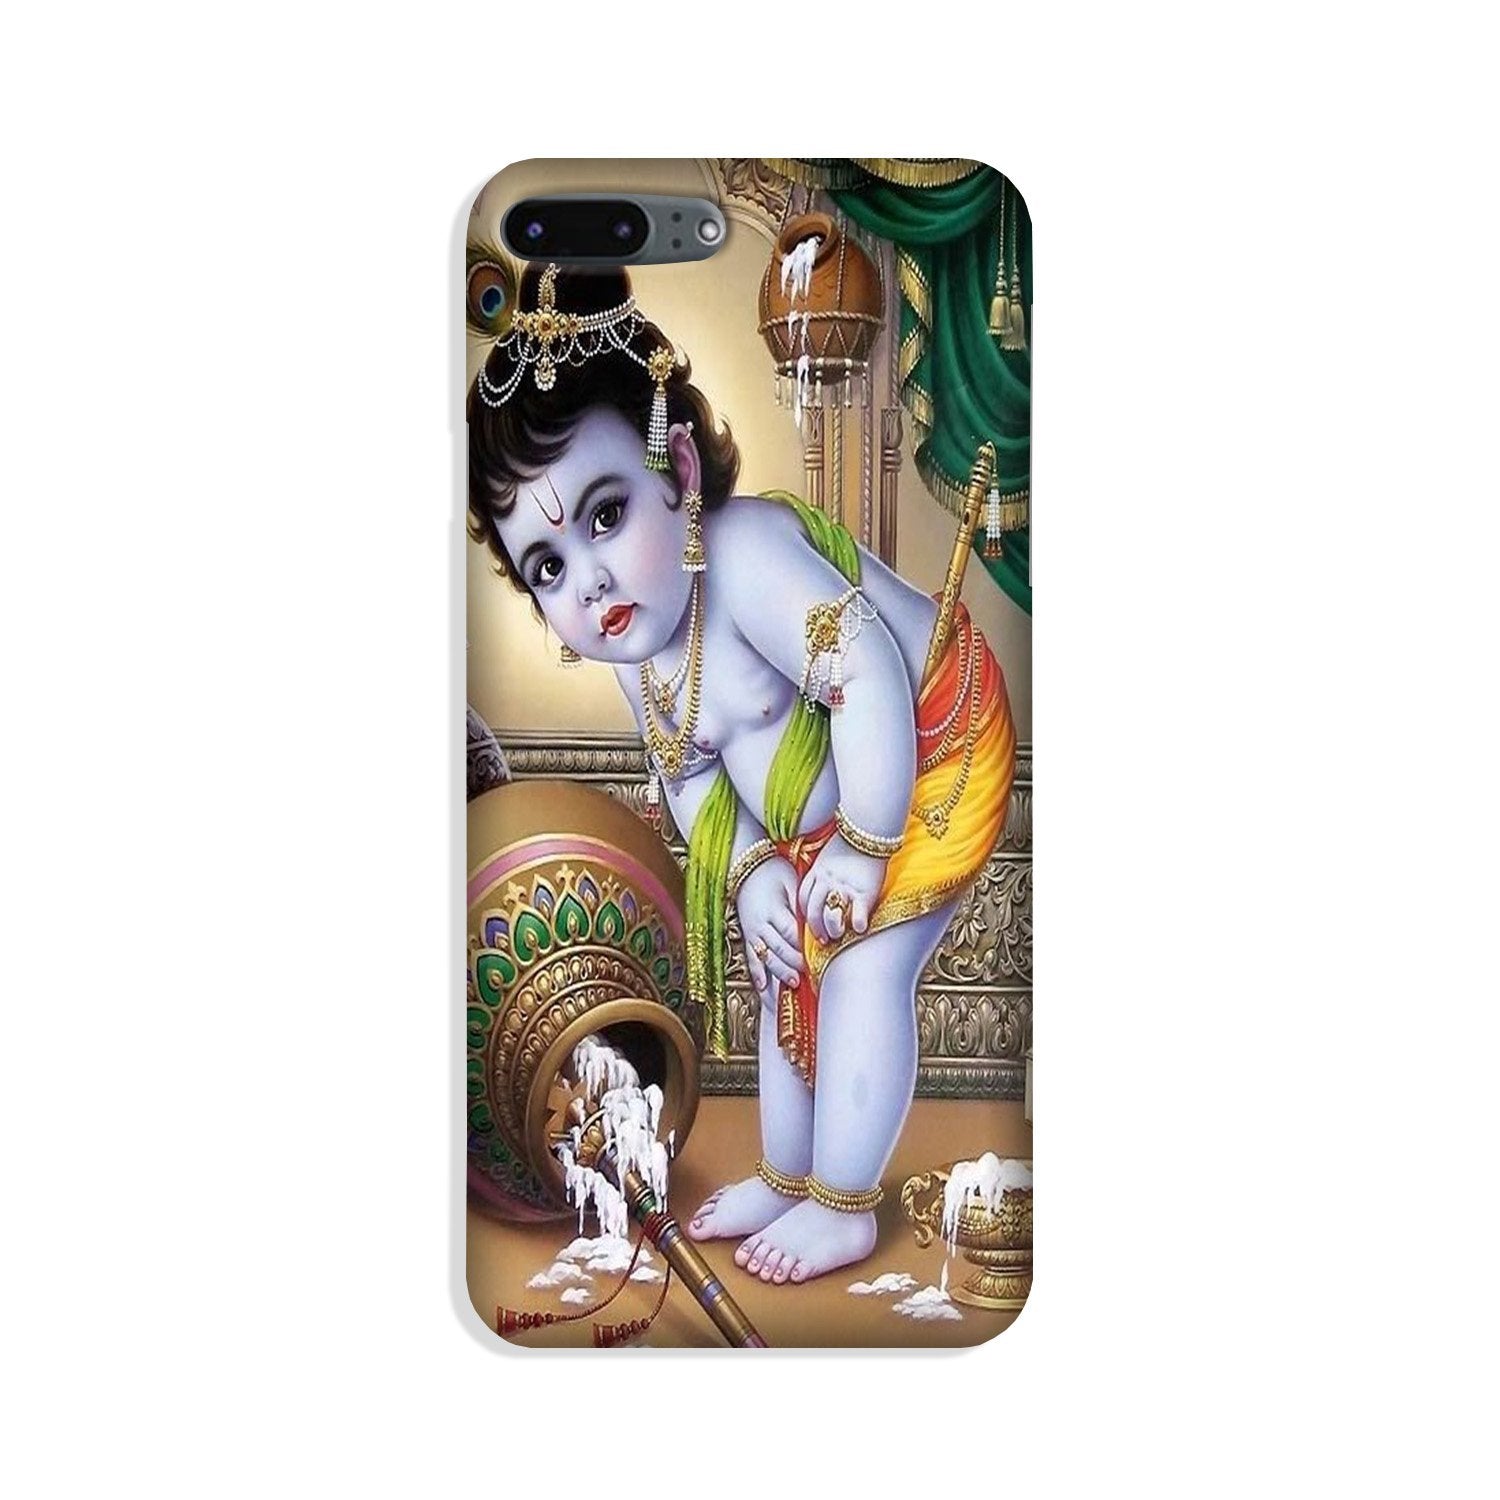 Bal Gopal2 Case for iPhone 8 Plus